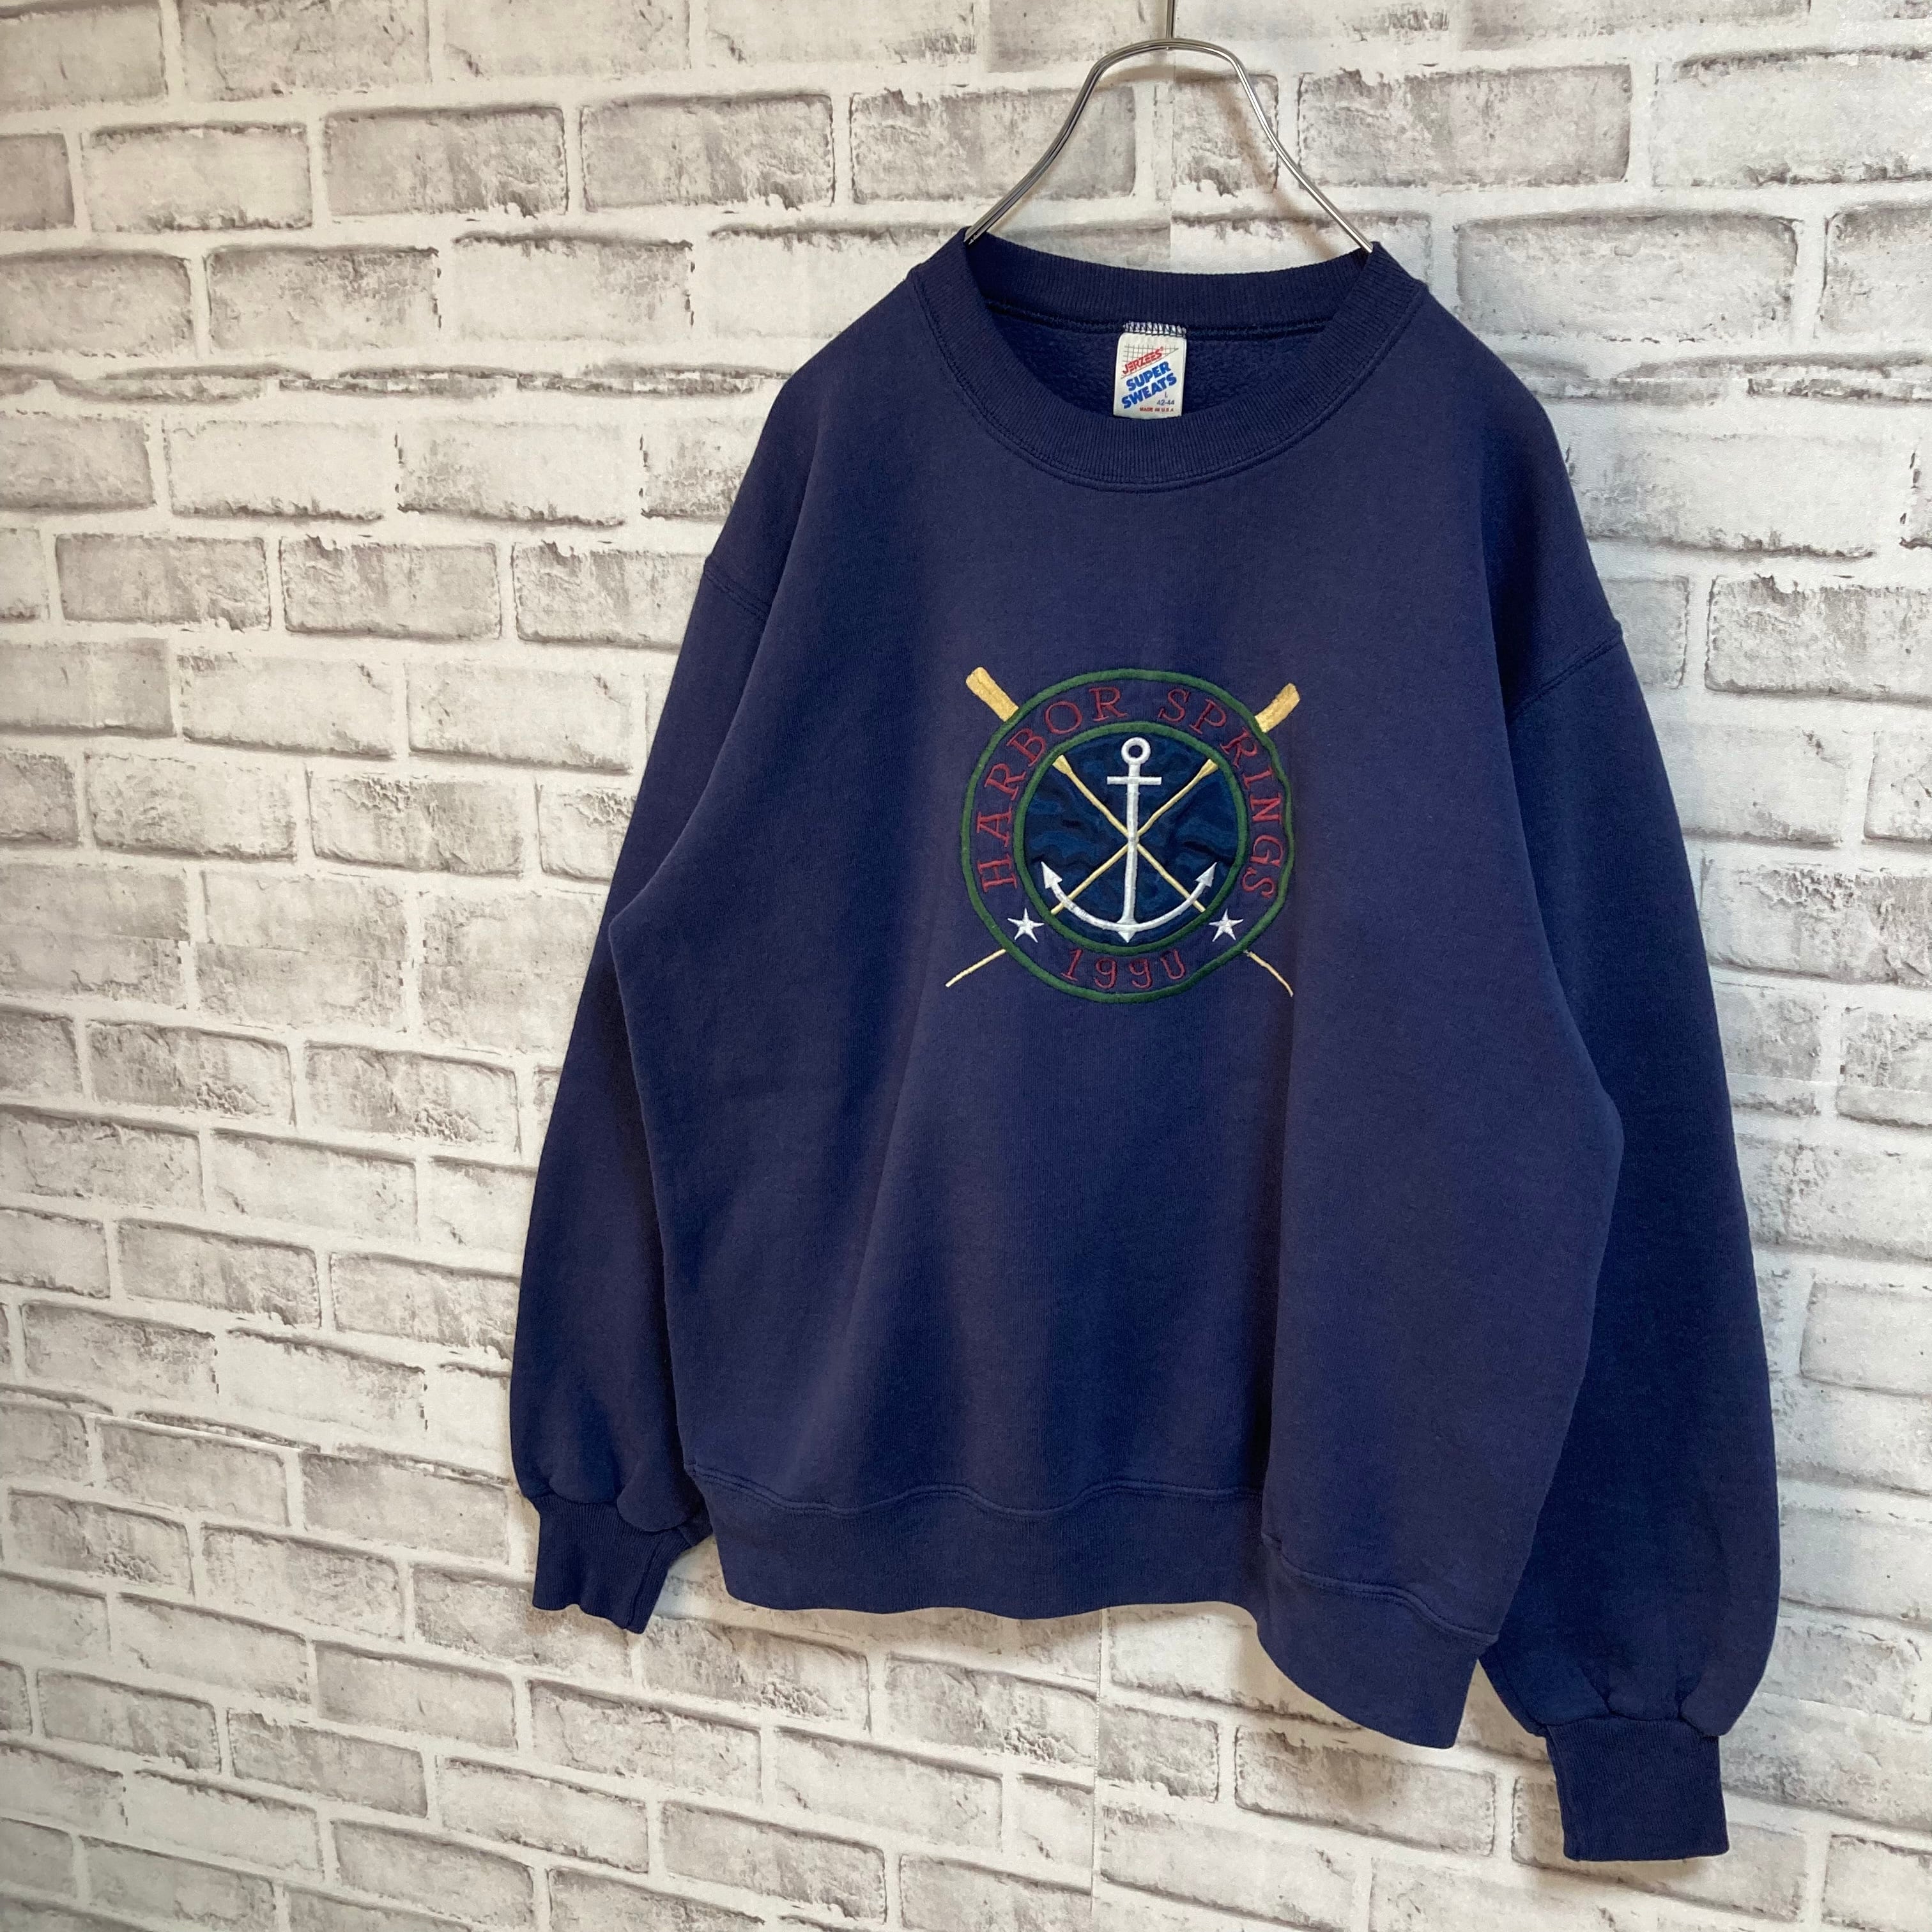 【JERZEES】L/S Sweat L Made in USA 90s ジャージーズ ...